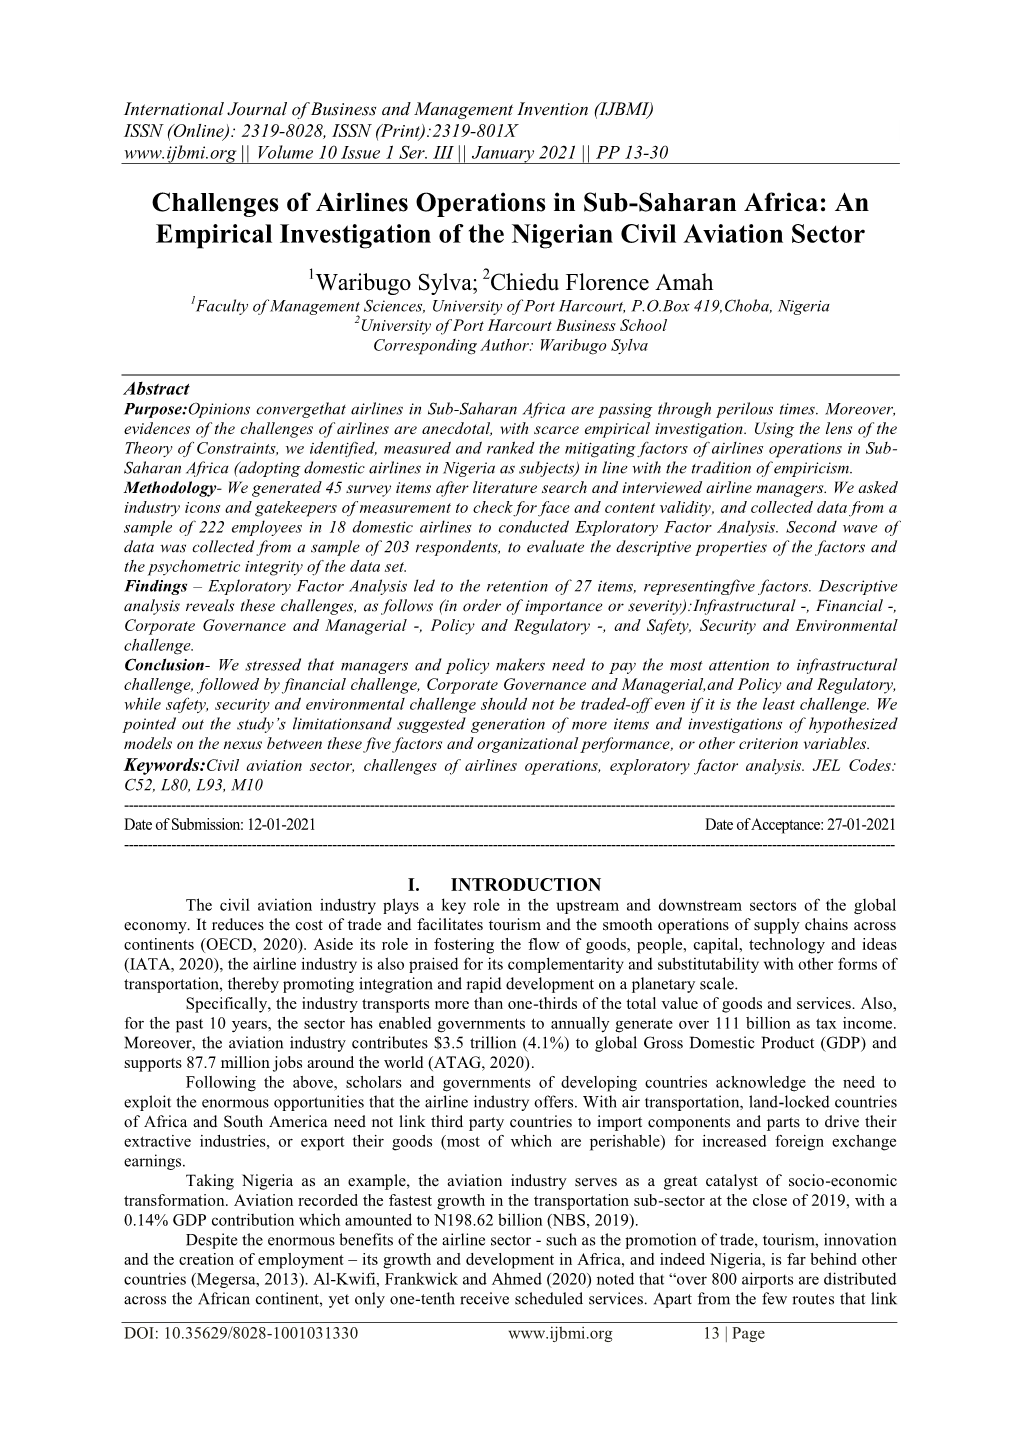 Challenges of Airlines Operations in Sub-Saharan Africa: an Empirical Investigation of the Nigerian Civil Aviation Sector